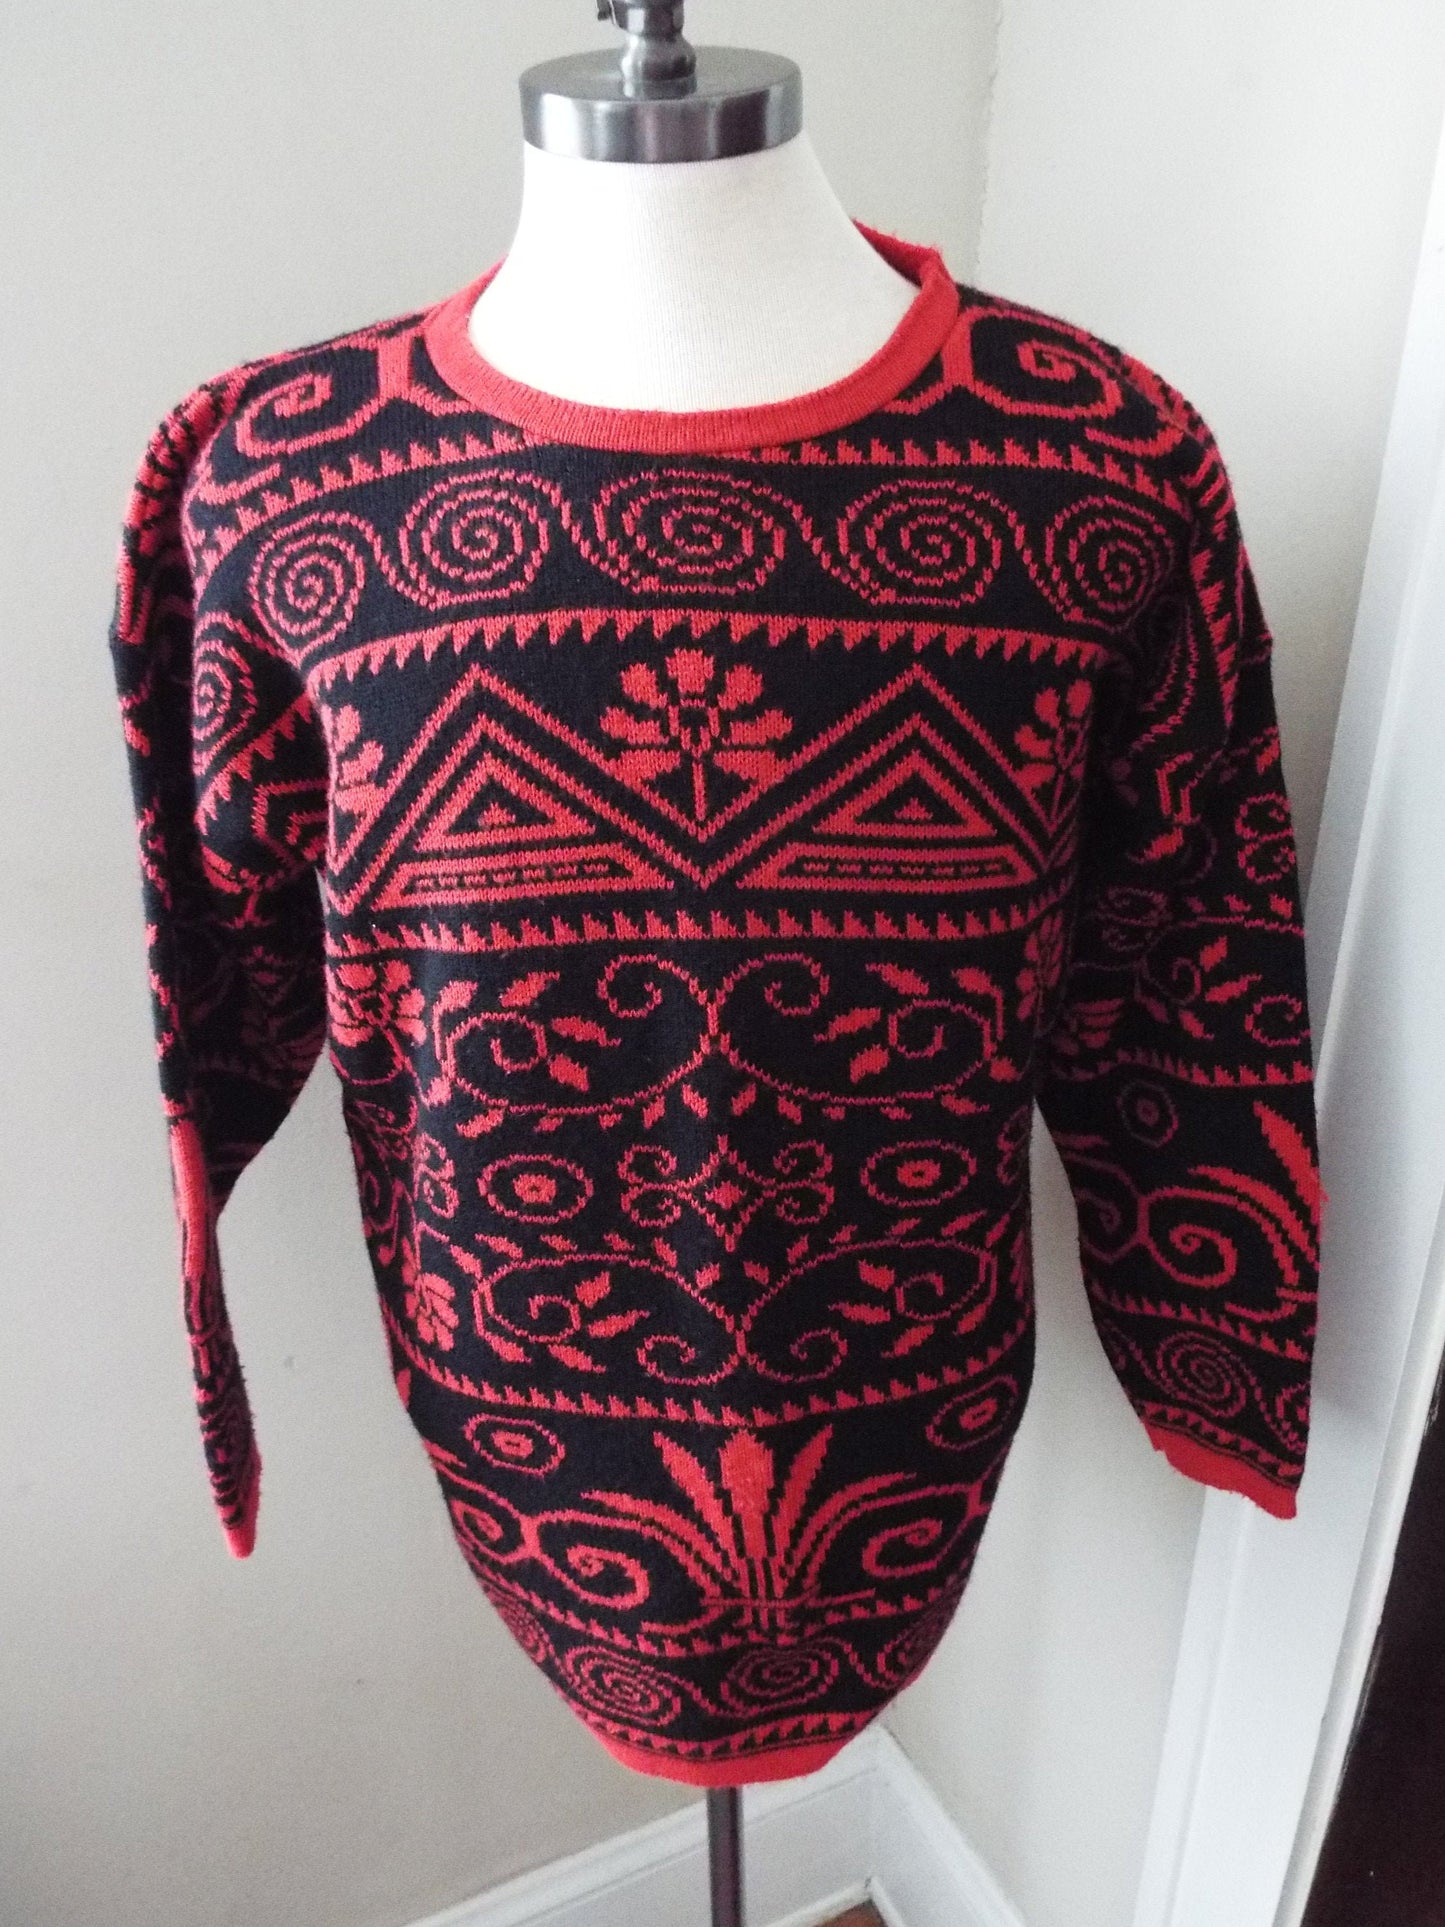 Vintage Long Sleeve Sweater by Rob Rich